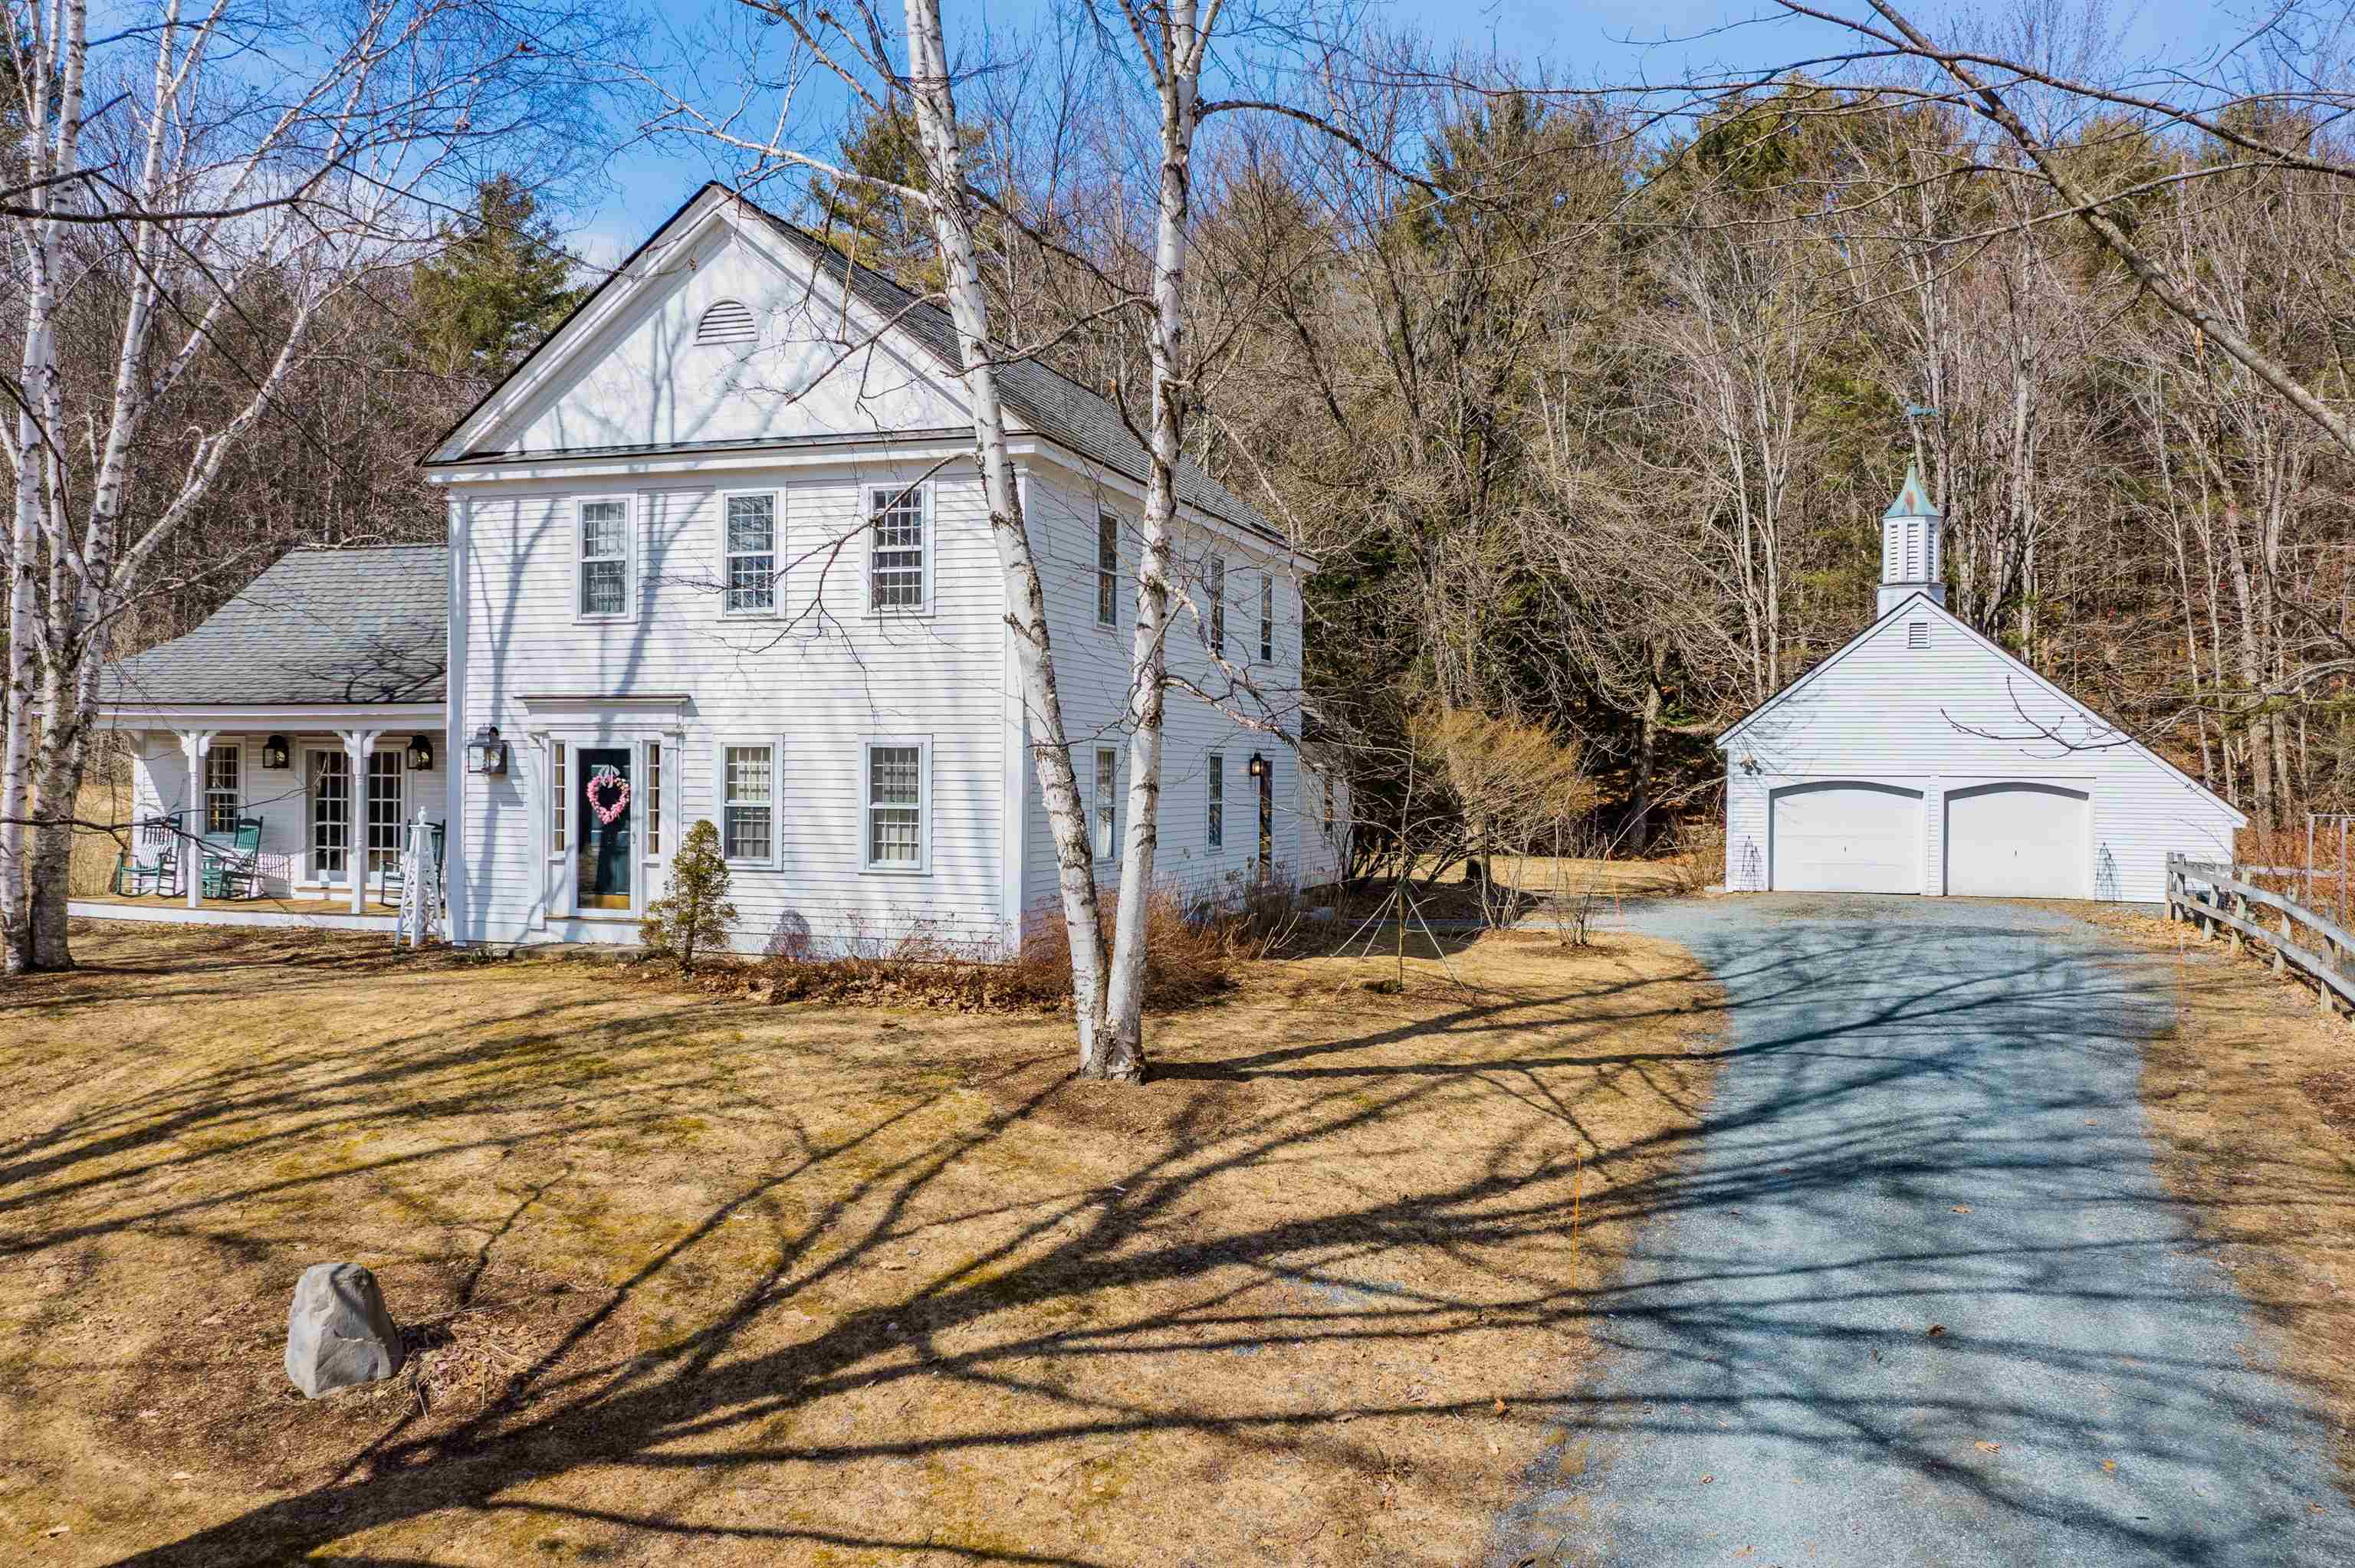 NORWICH VT Homes for sale